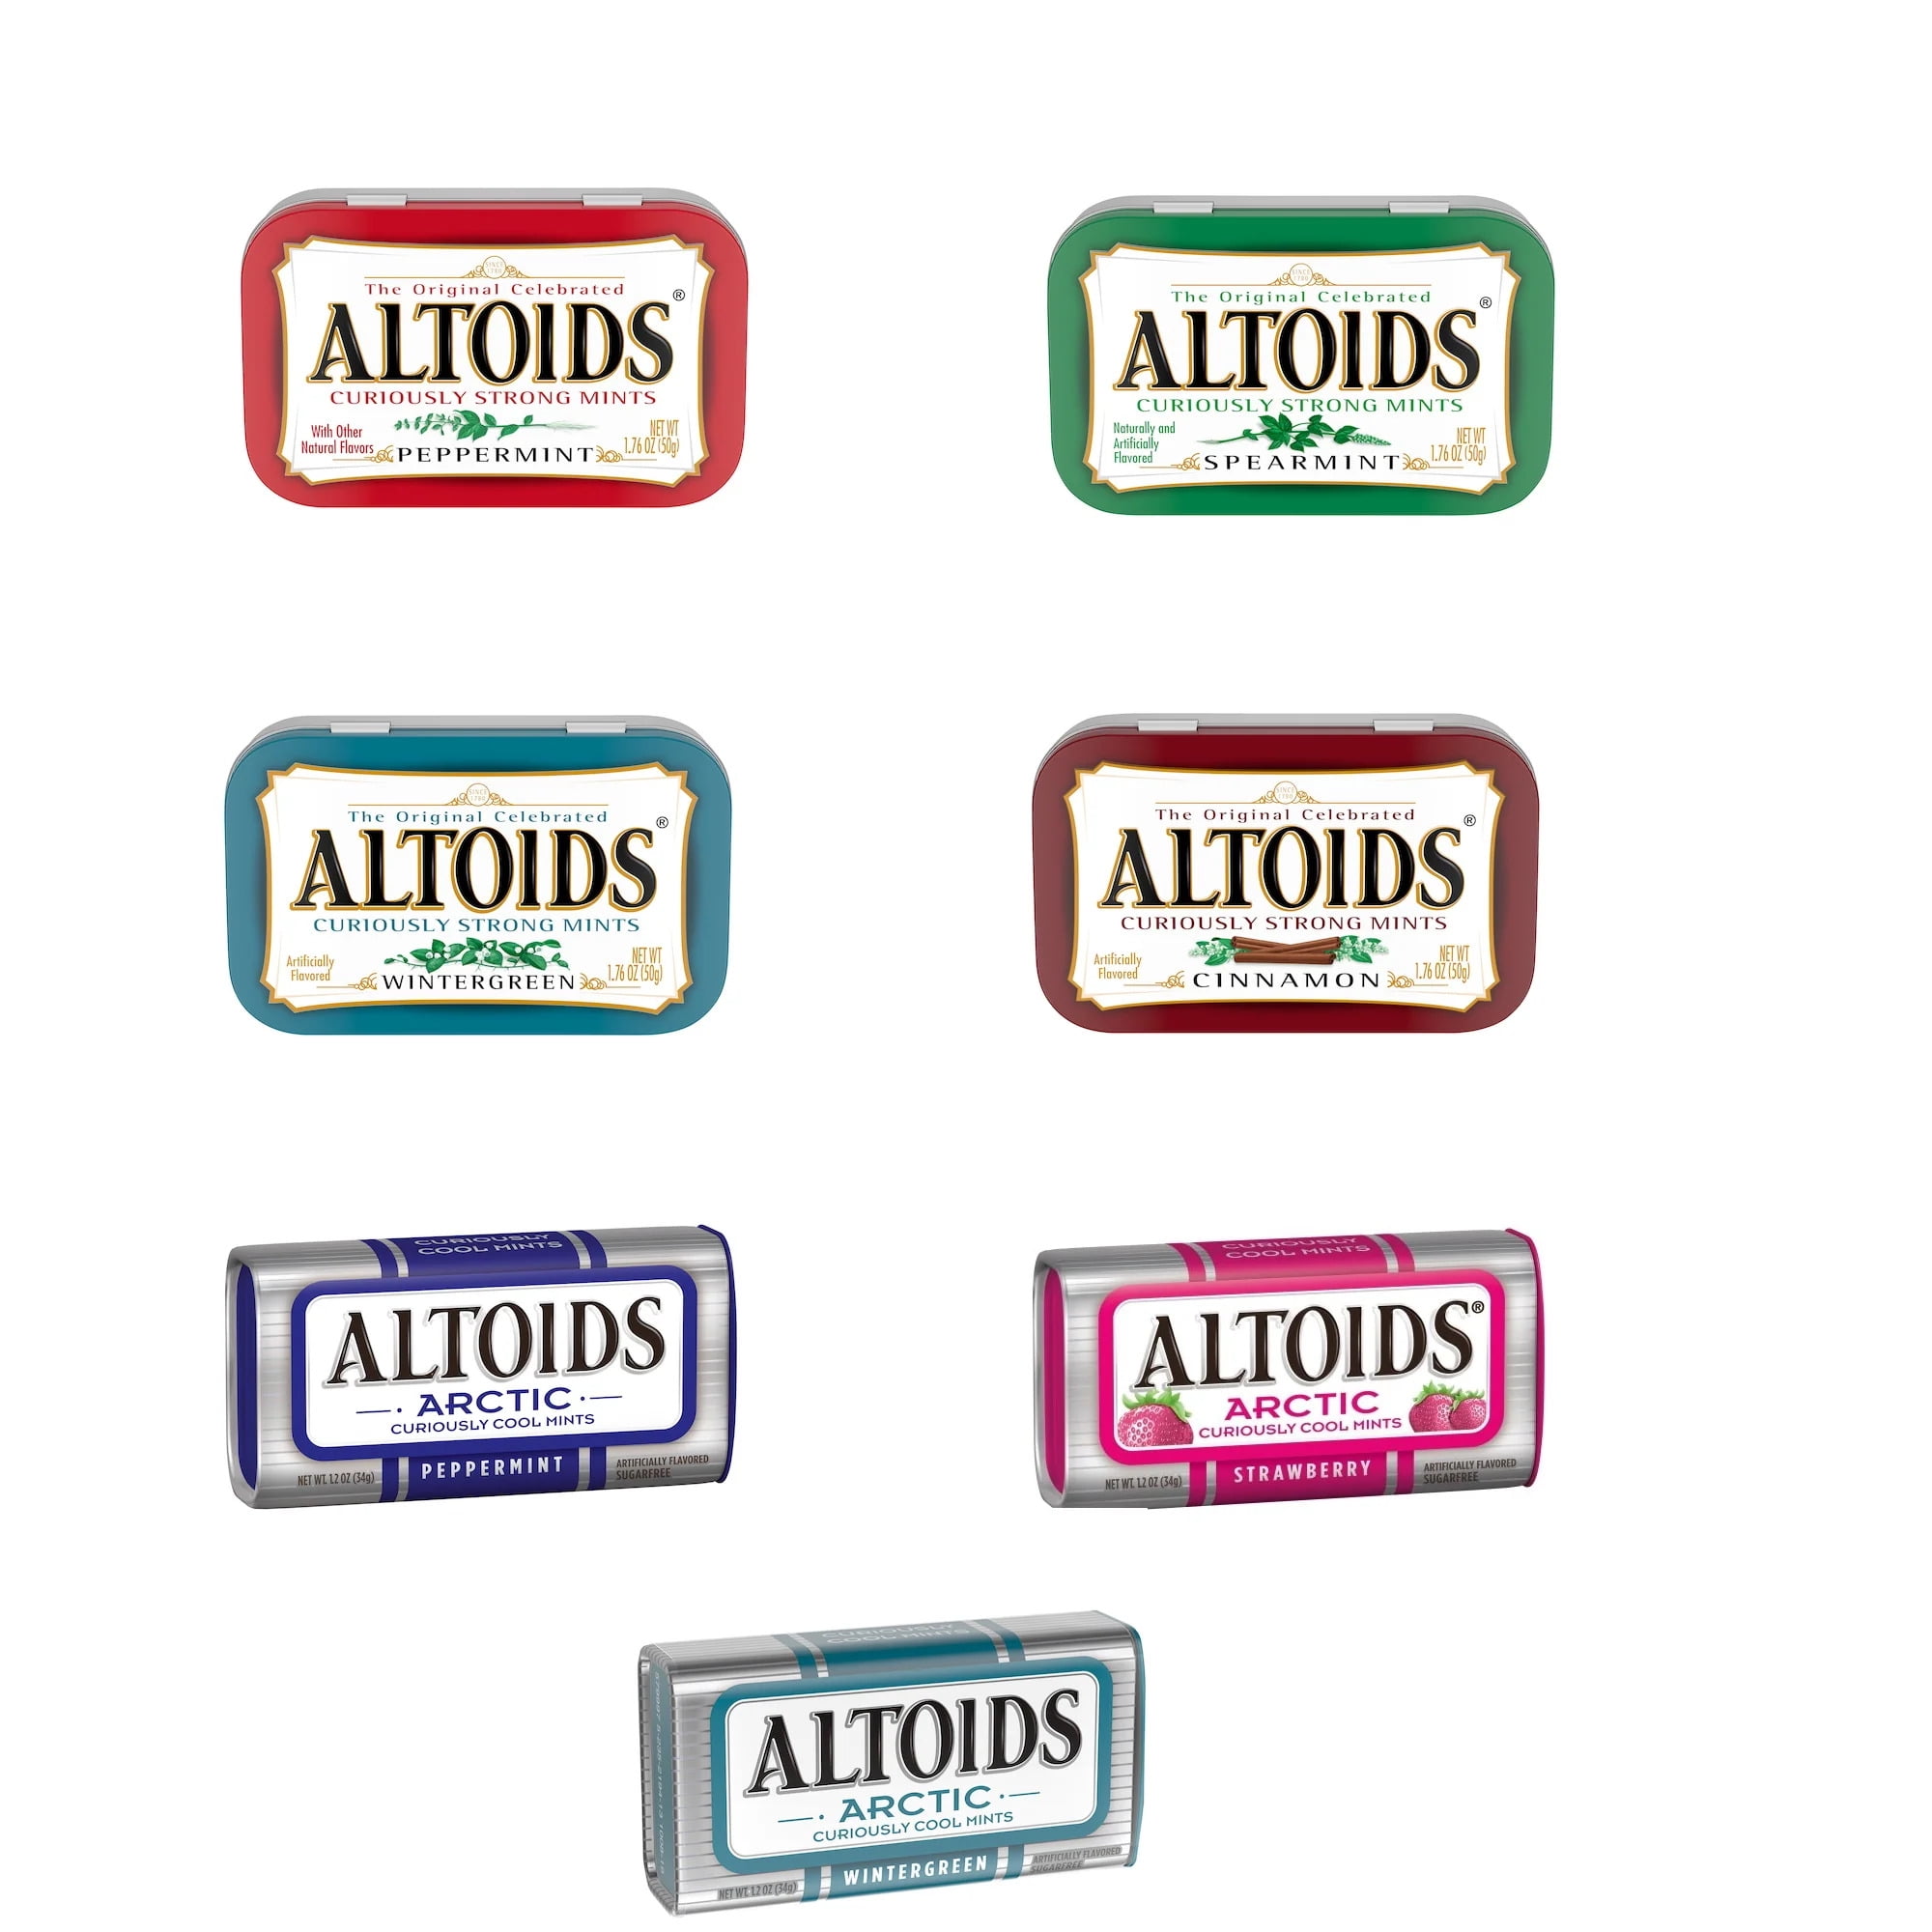 Altoids Variety Pack- 7 Flavors Include- Peppermint, Cinnamon, Wintergreen,  Spearmint, Strawberry, Arctic Peppermint, and Arctic Wintergreen